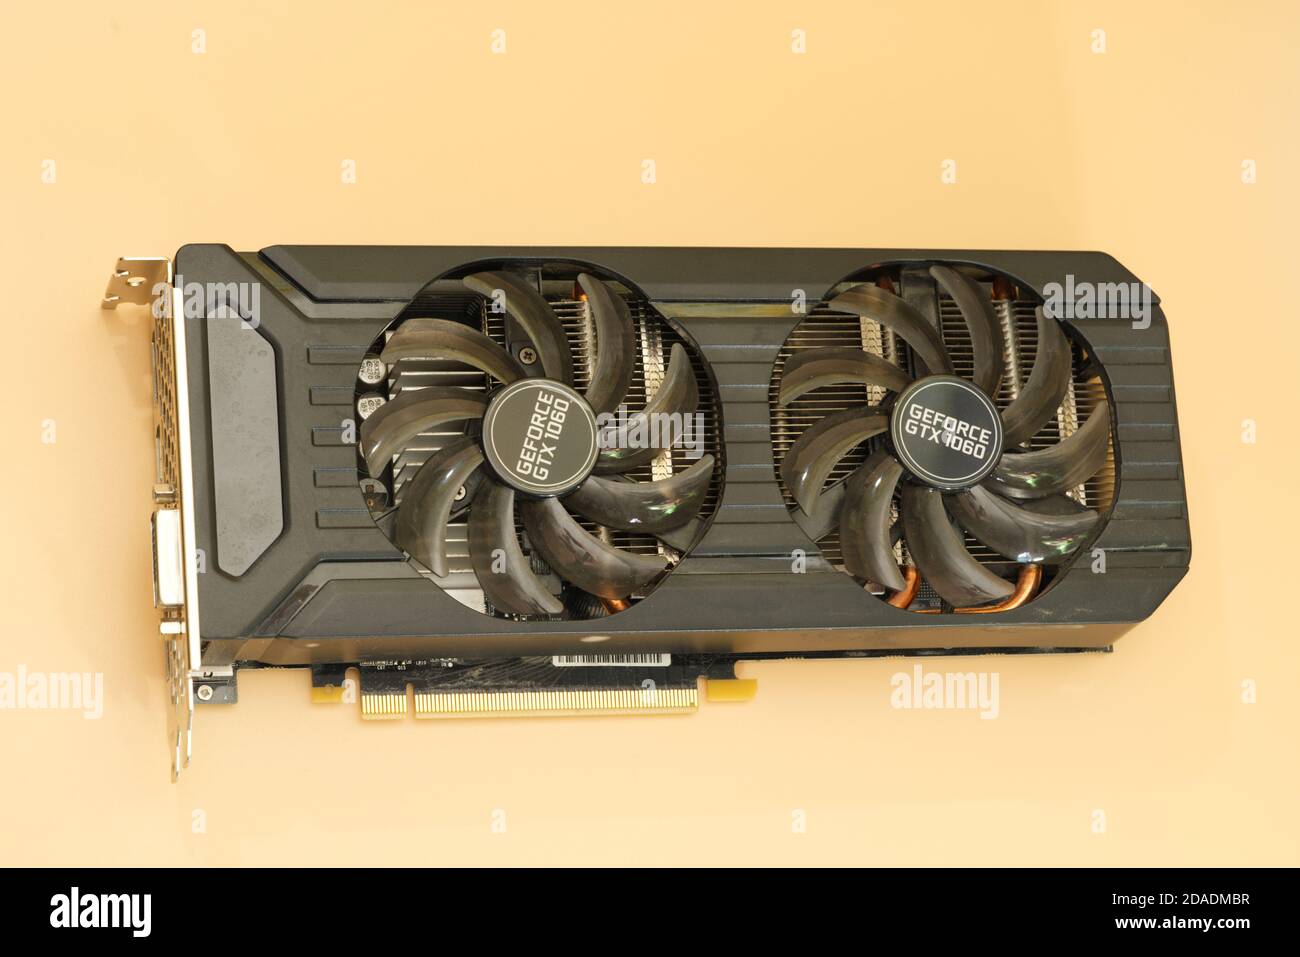 palit dual nvidia geforce gtx 1060 video card used top view  Stock Photo